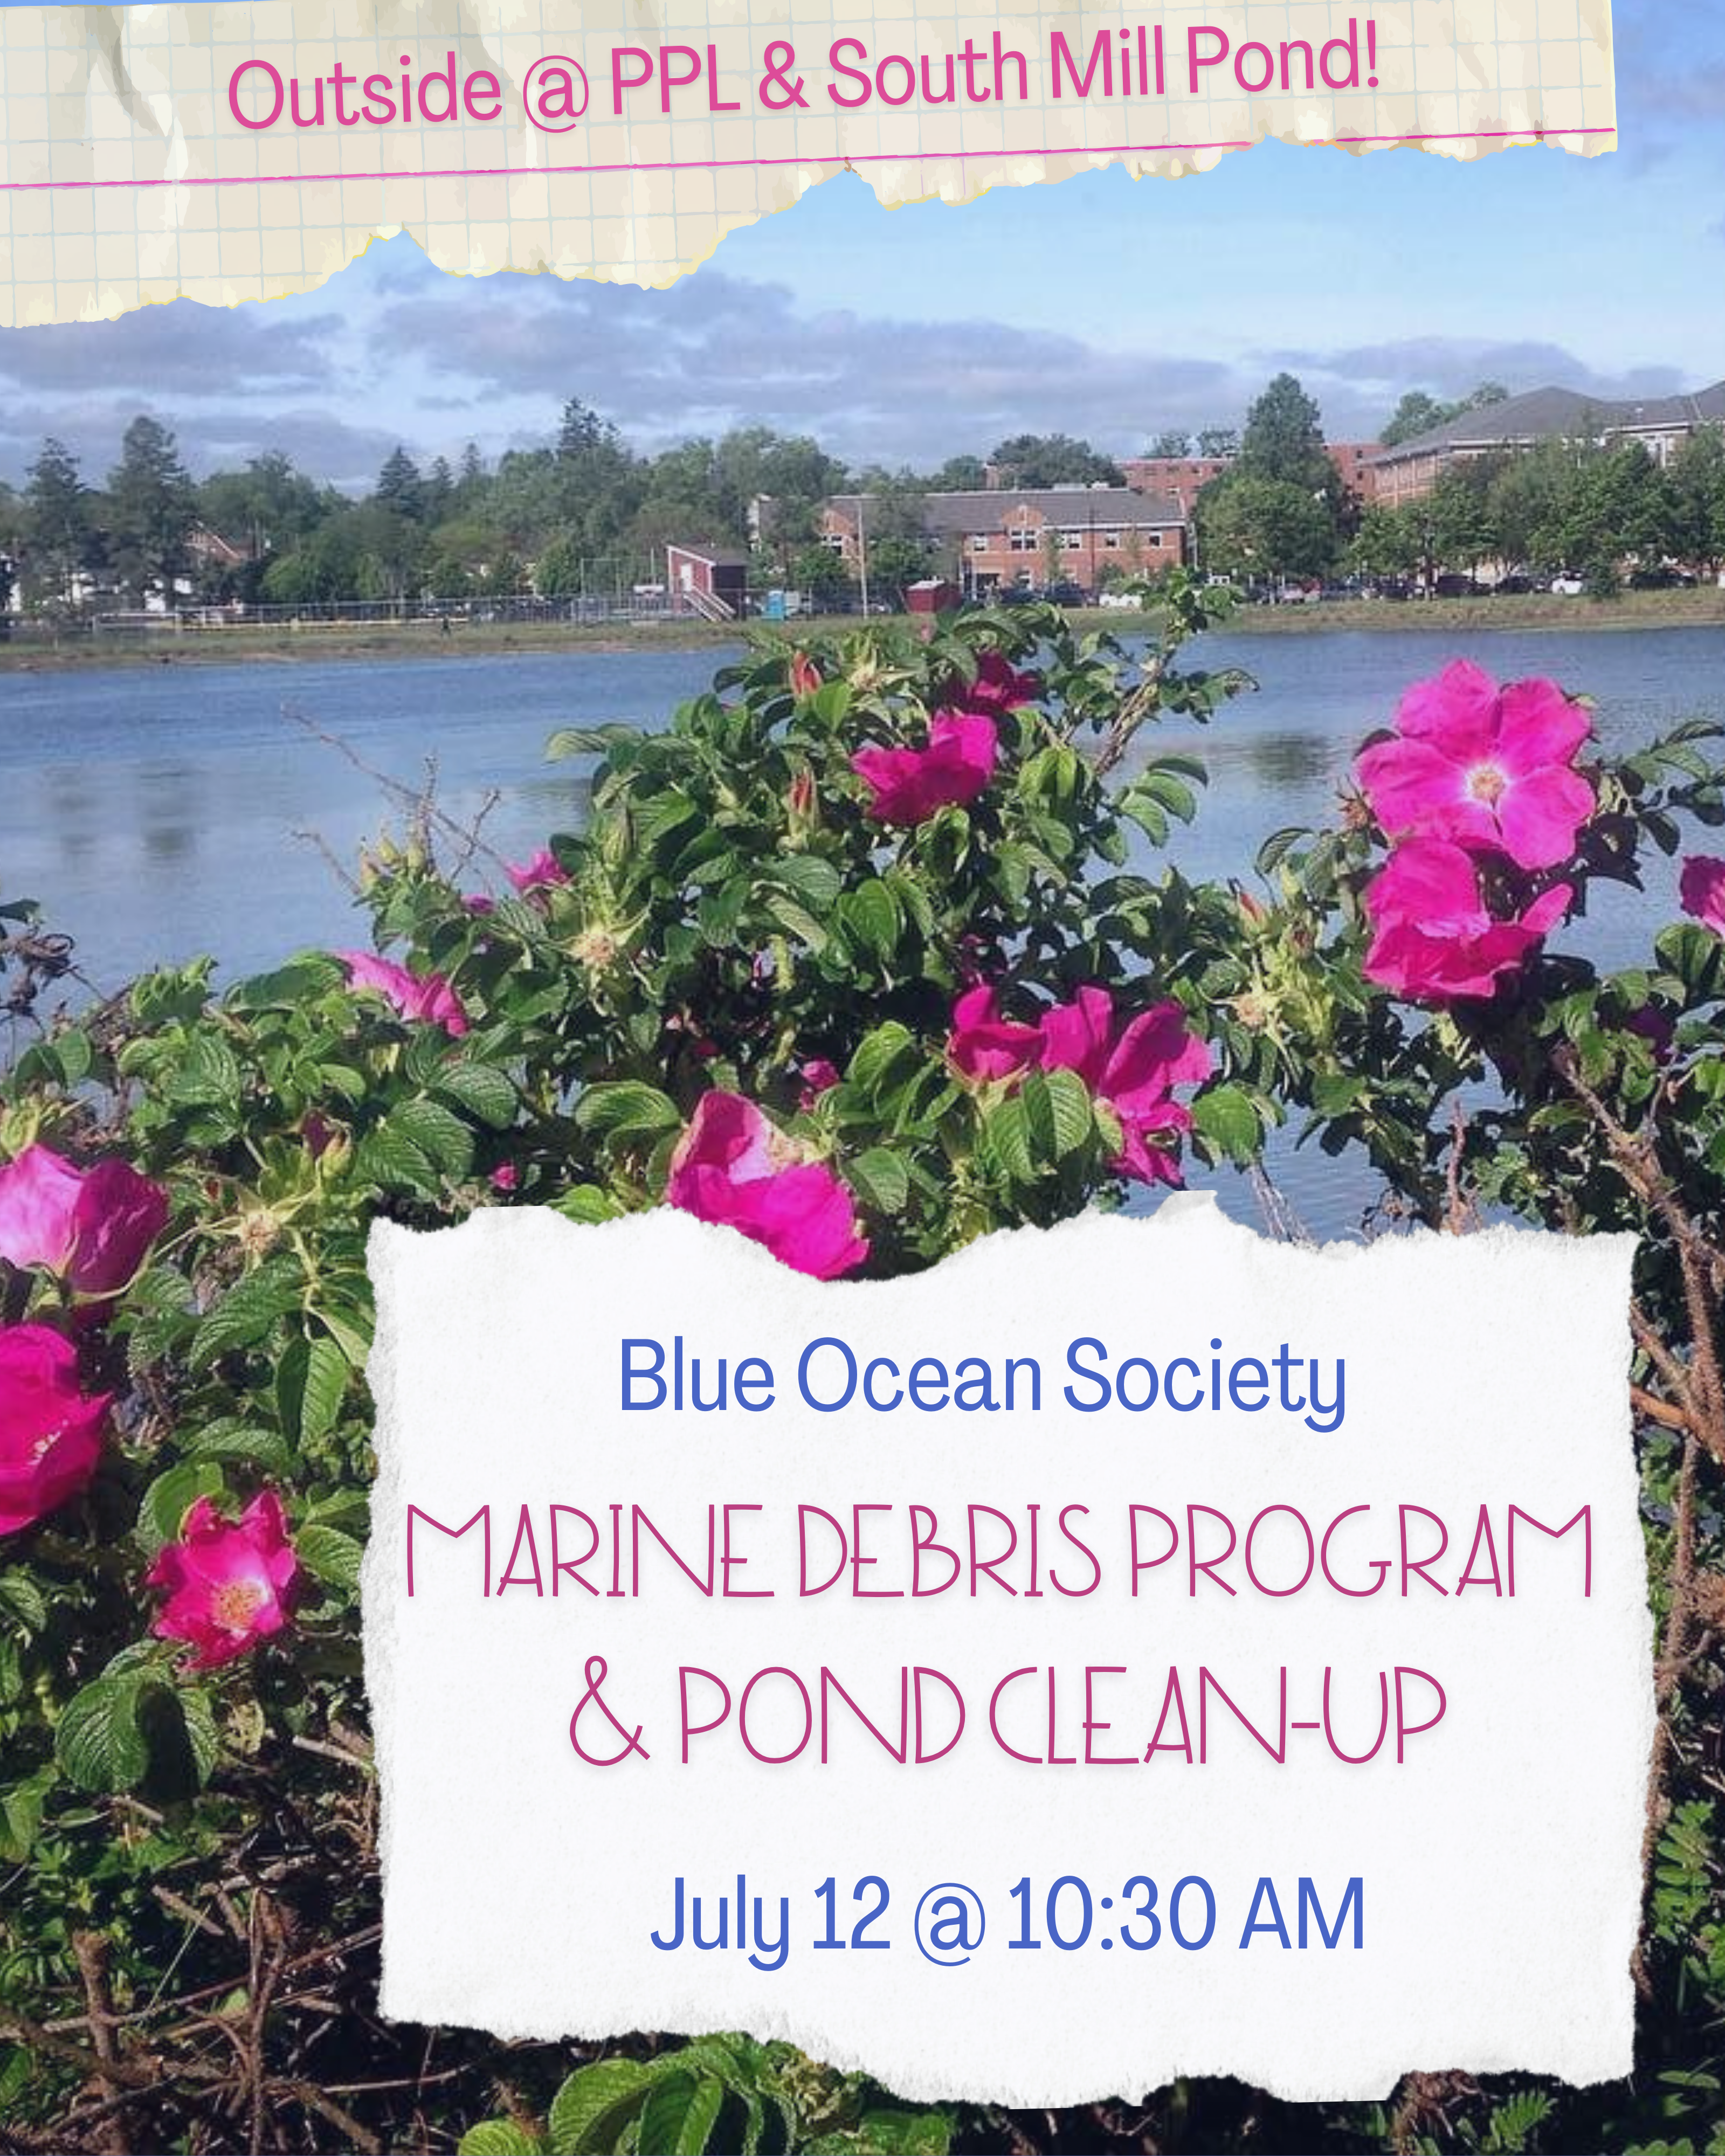 Photograph of beach roses at edge of South Mill Pond with Portsmouth Public Library in the distance. Text reads: Outside @ PPL & South Mill Pond Blue Ocean Society MARINE DEBRIS PROGRAM & CLEAN-UP July 12 10:30 AM